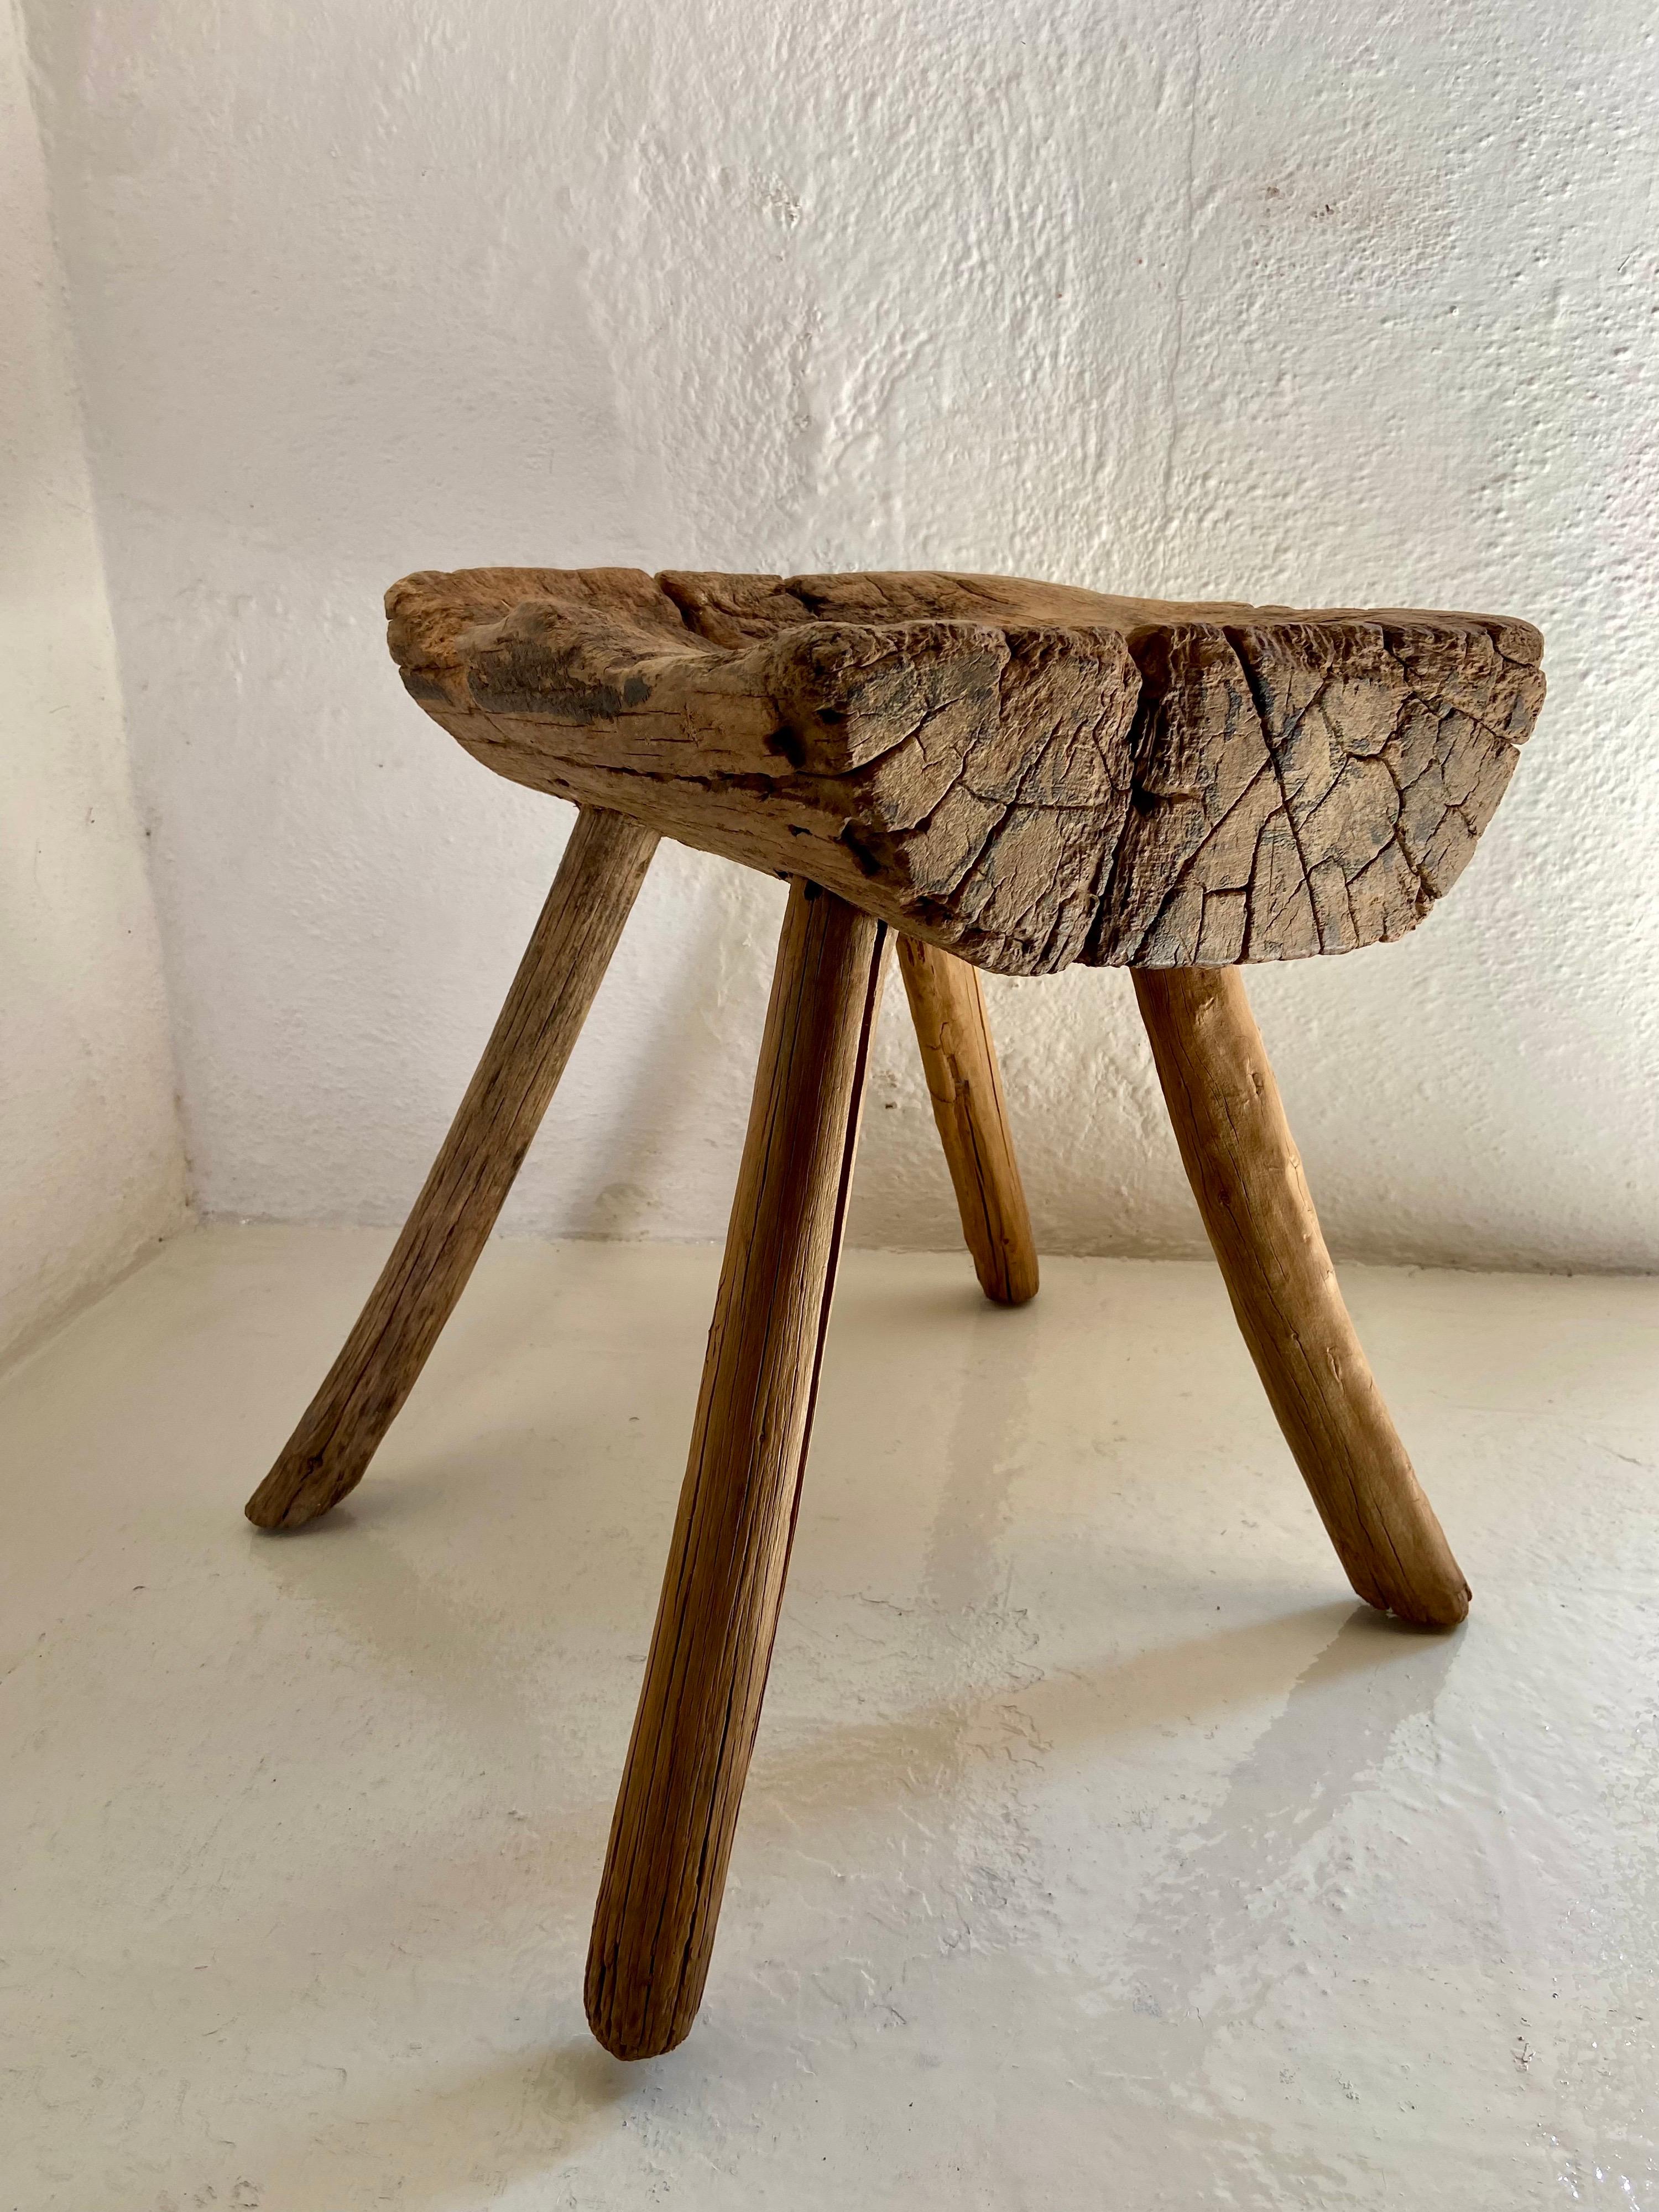 Hand-Carved Primitive Stool from Mexico, circa 1970's